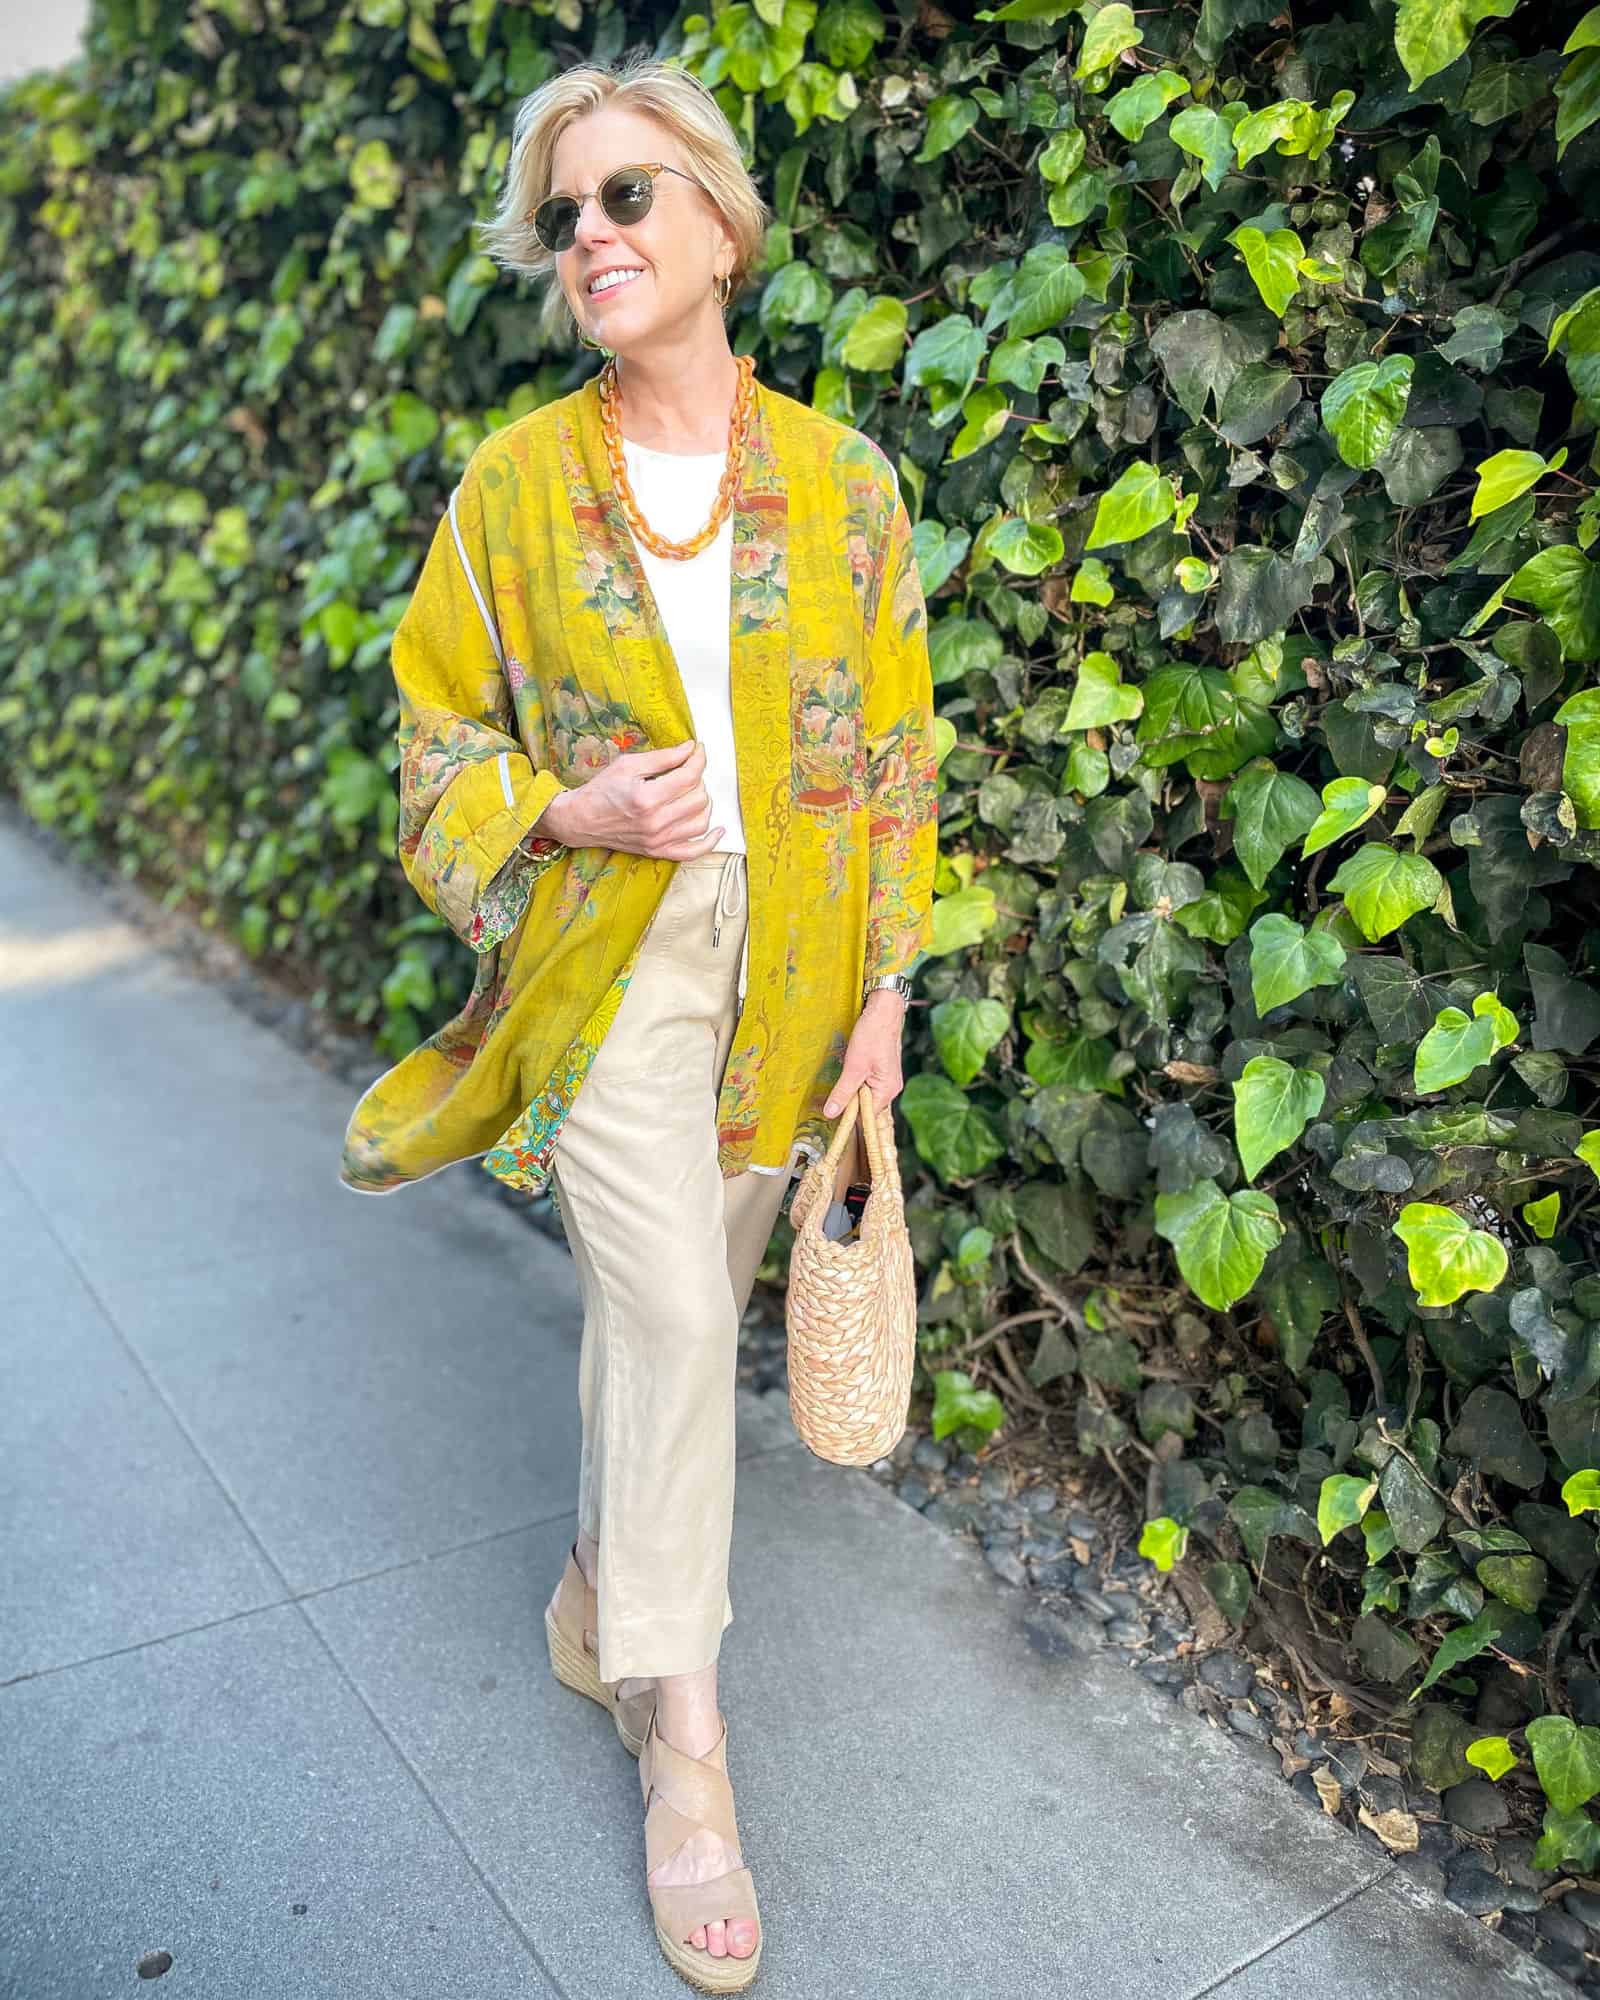 Doubling down: another look with a reversible kimono